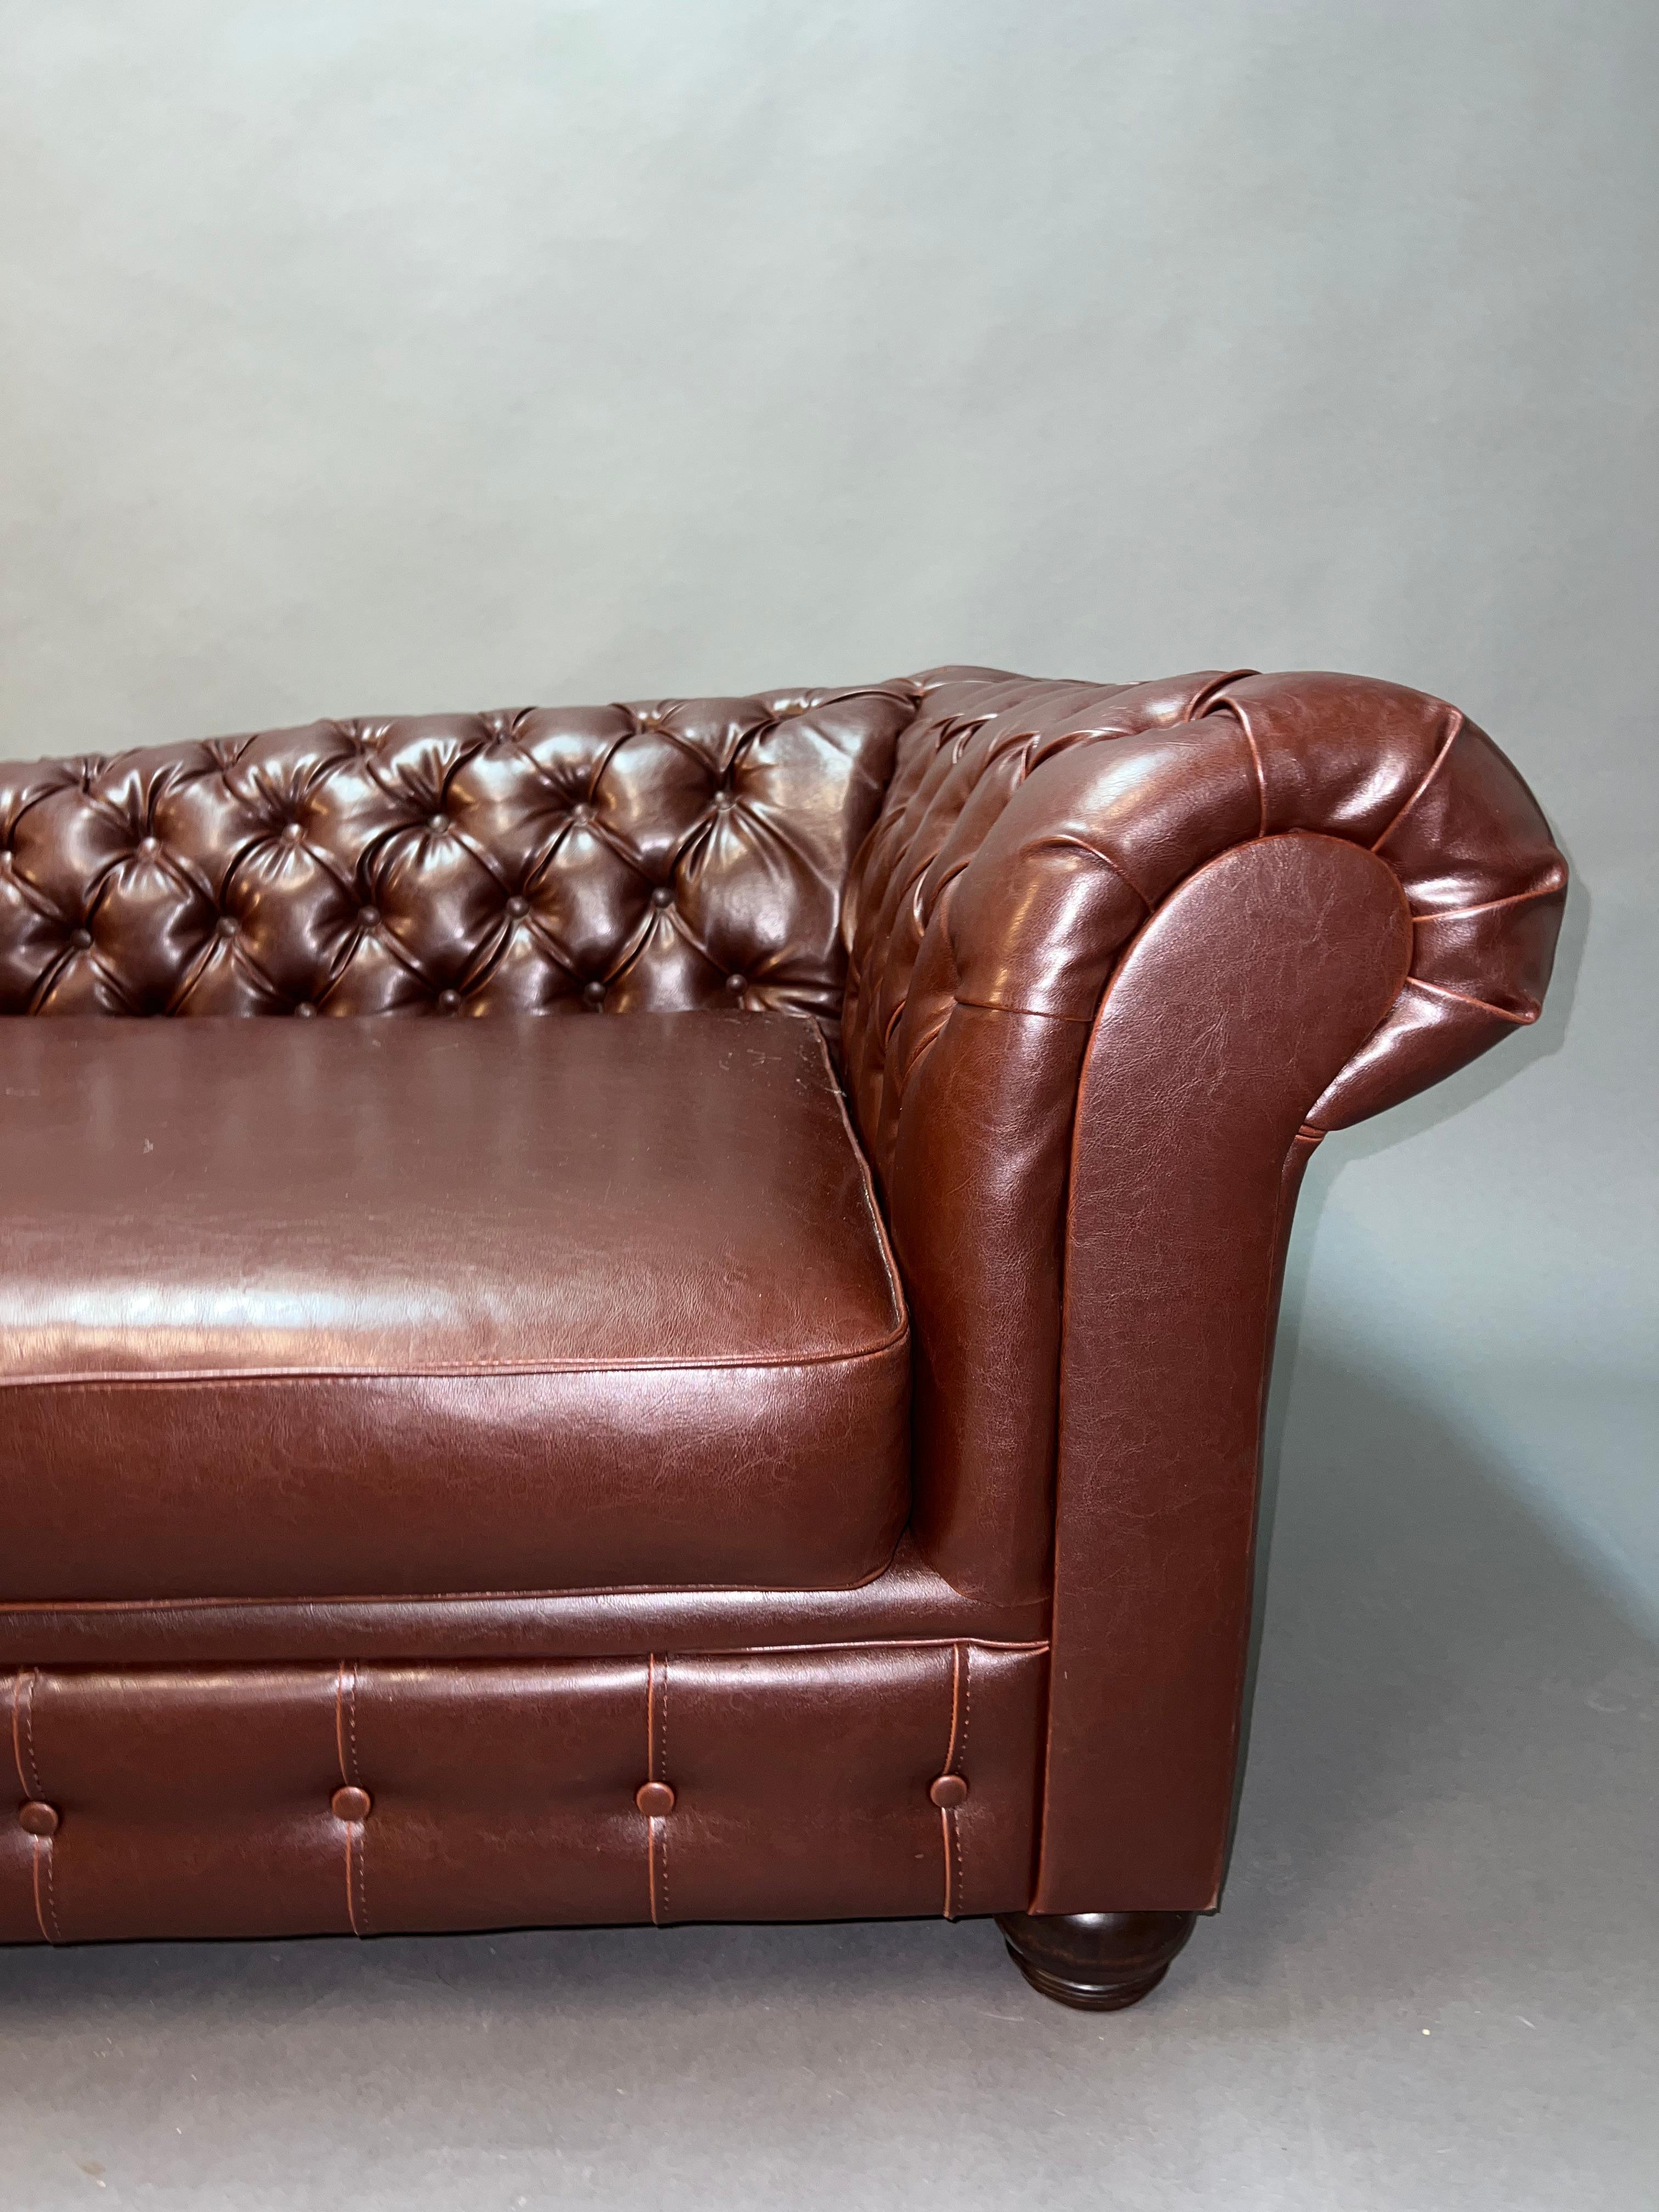 Lovely Vintage Chesterfield Brown Leather Look Chaise Lounge Daybed Sofa In Good Condition For Sale In Berlin, DE